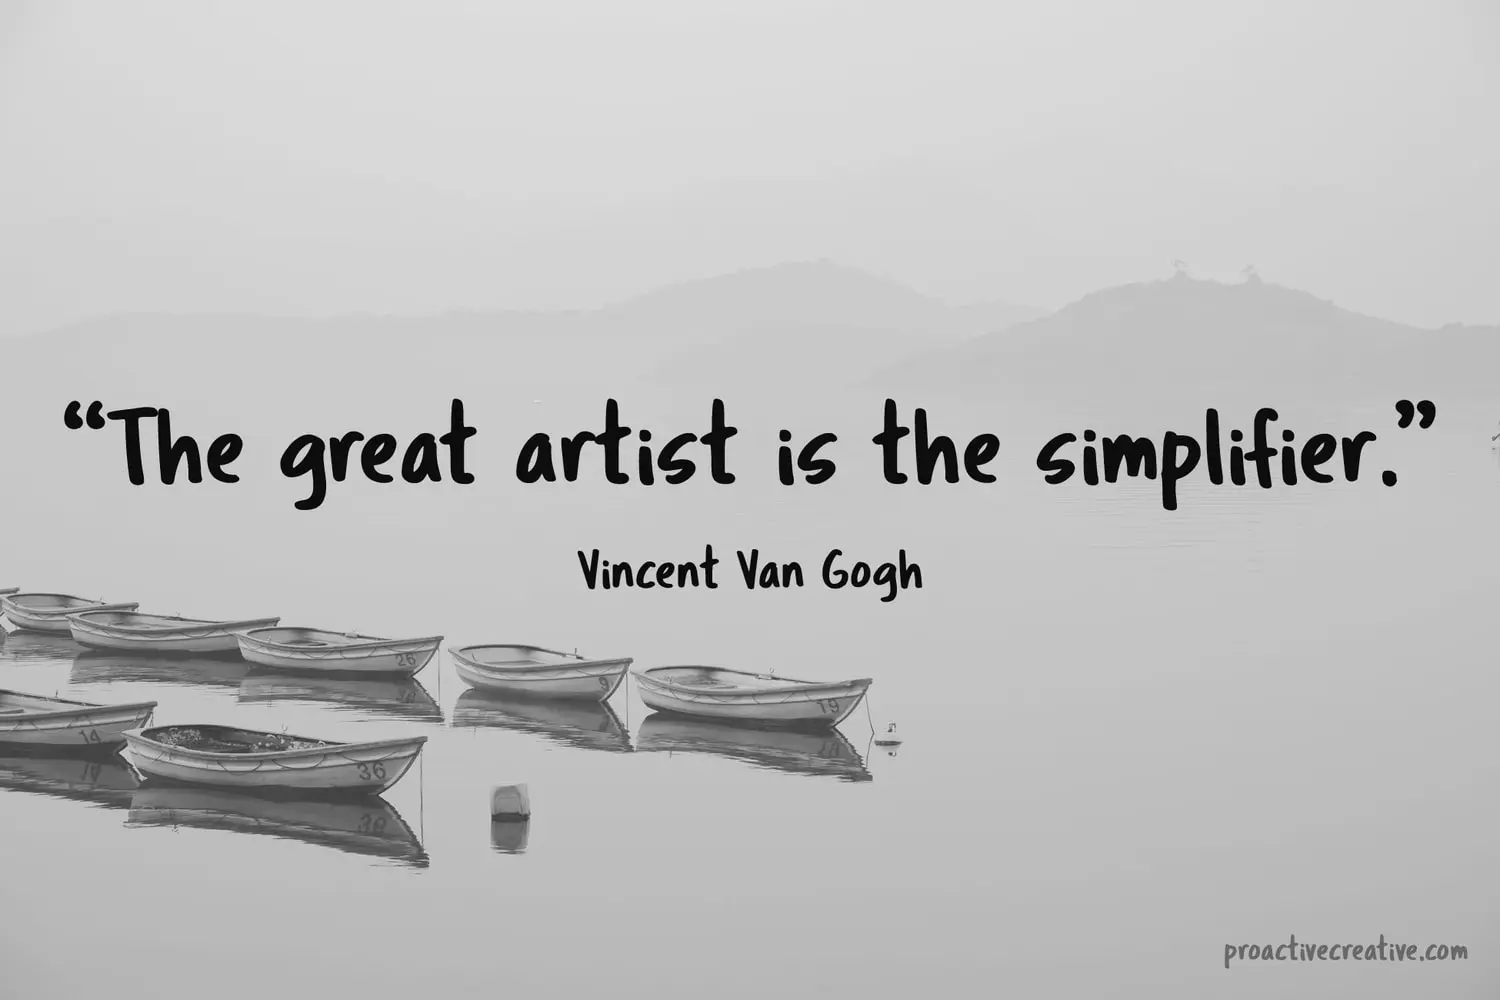 Quotes on art and creativity - Vincent Van Gogh